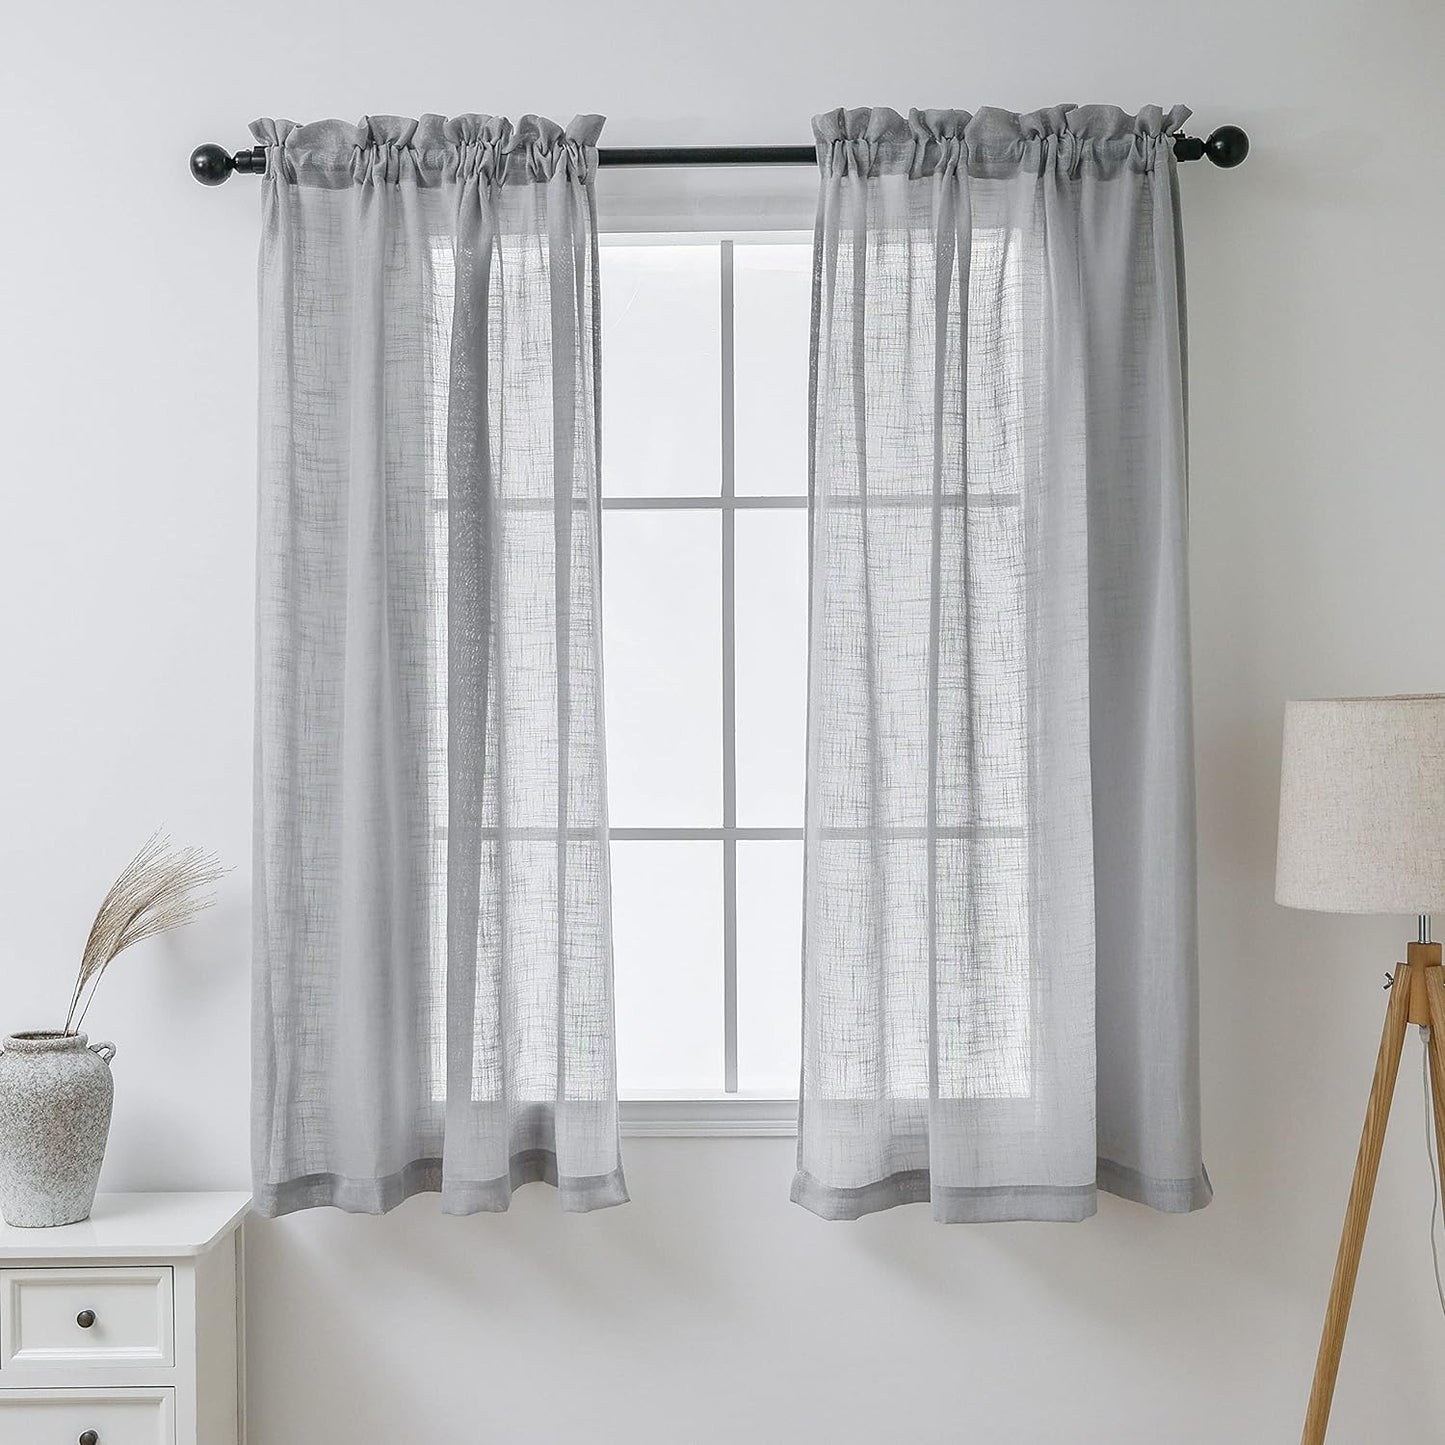 Demetex Sheer Linen Curtains 72 Inches Long Natrual Semi Sheer Curtain Decorative Panels for Living Room Bedroom Porch Window Dressing, 54 X 72 Inches, 2 Pieces, Beige  Demetex Semi Grey W 54"X L 45" 